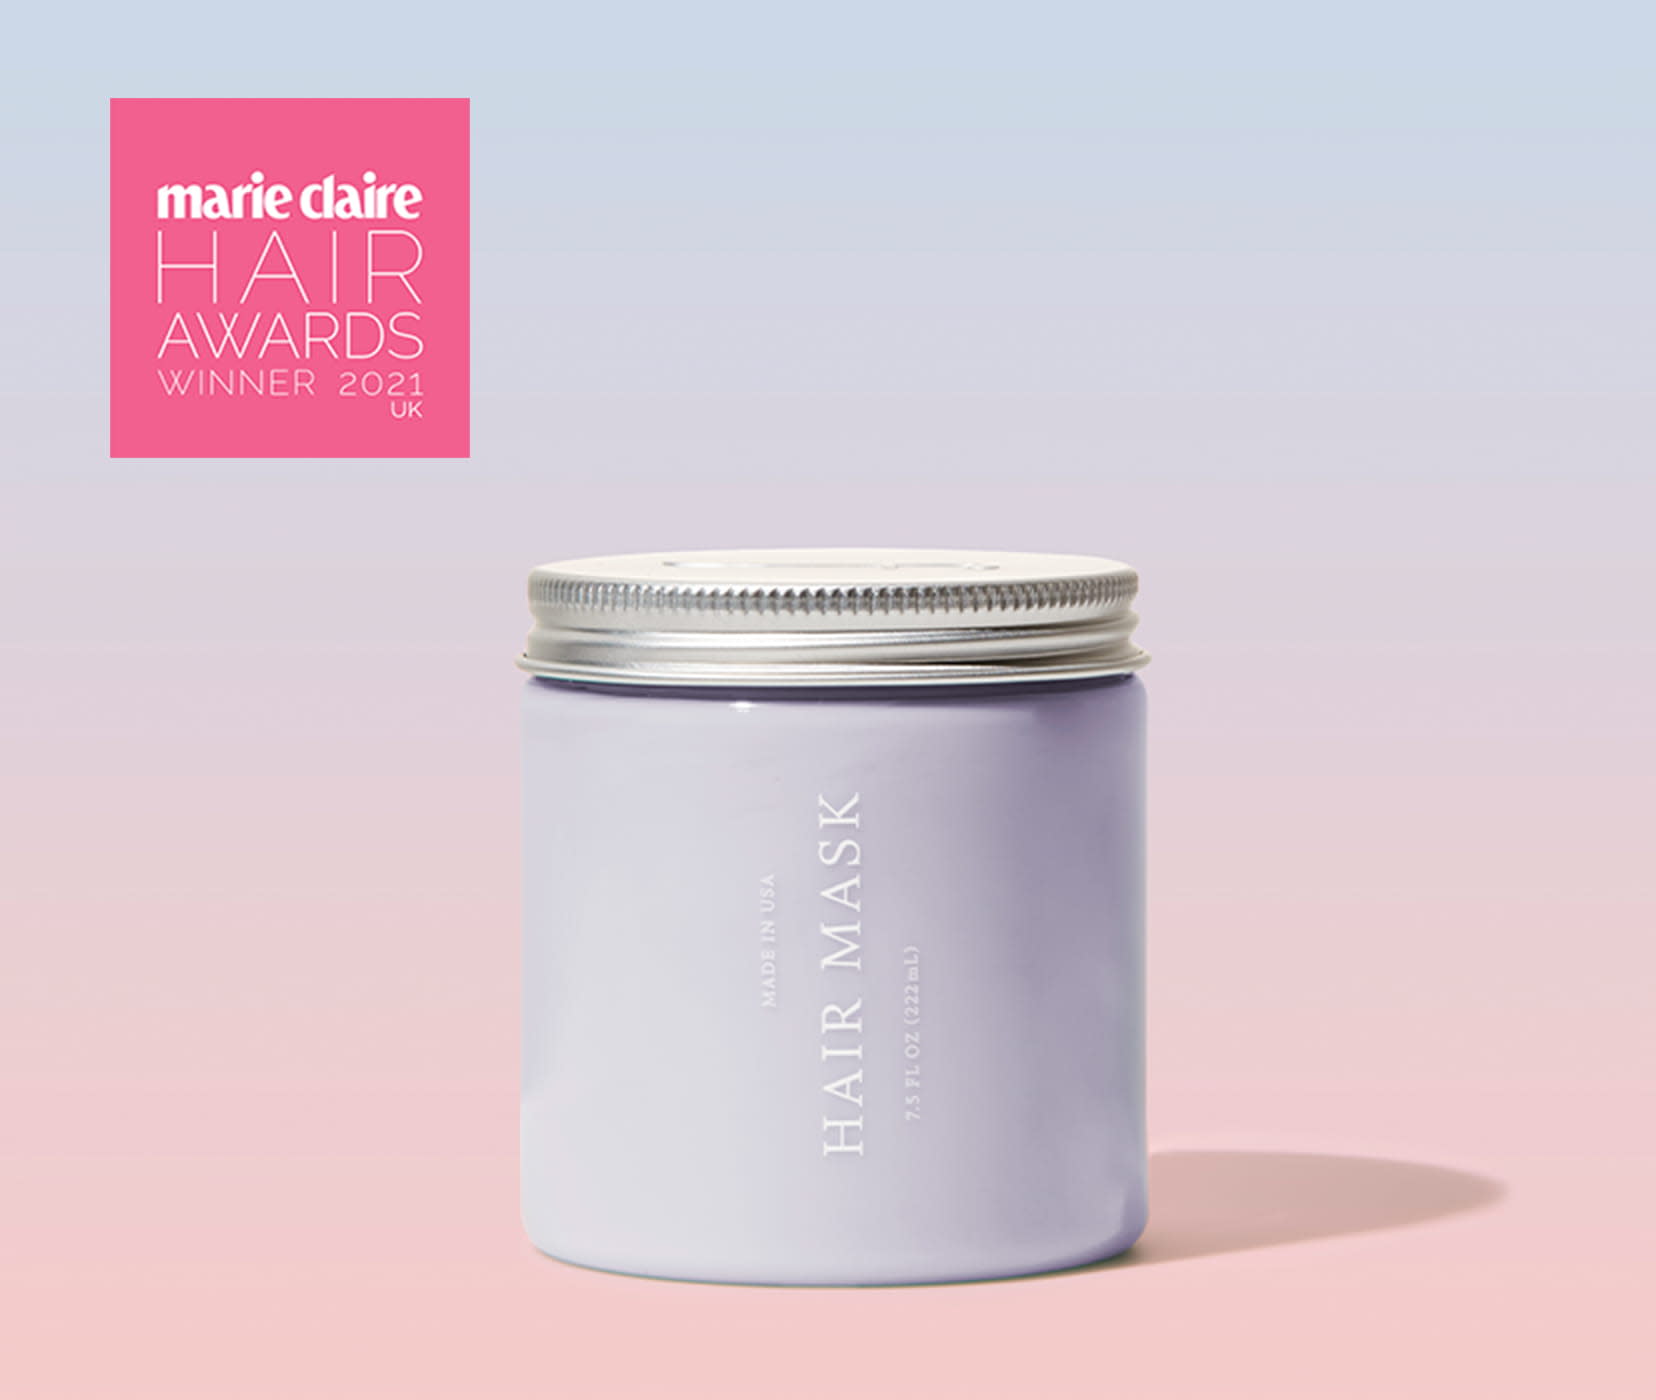 Customized hair mask in blue color, with Marie Claire award winner badge. 